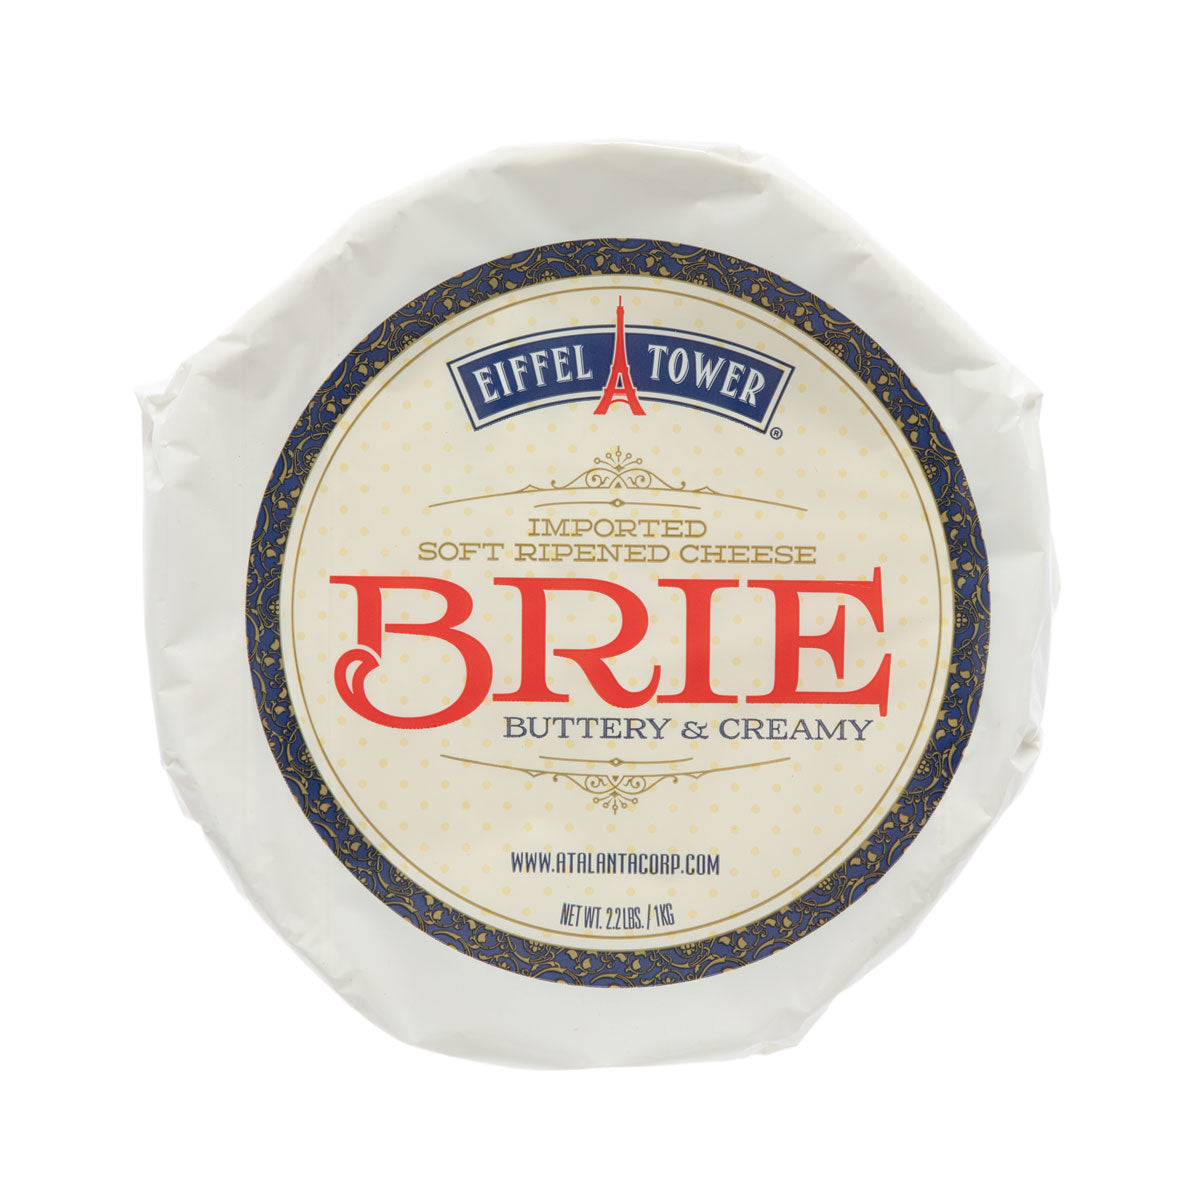 Eiffel Tower Imported Brie